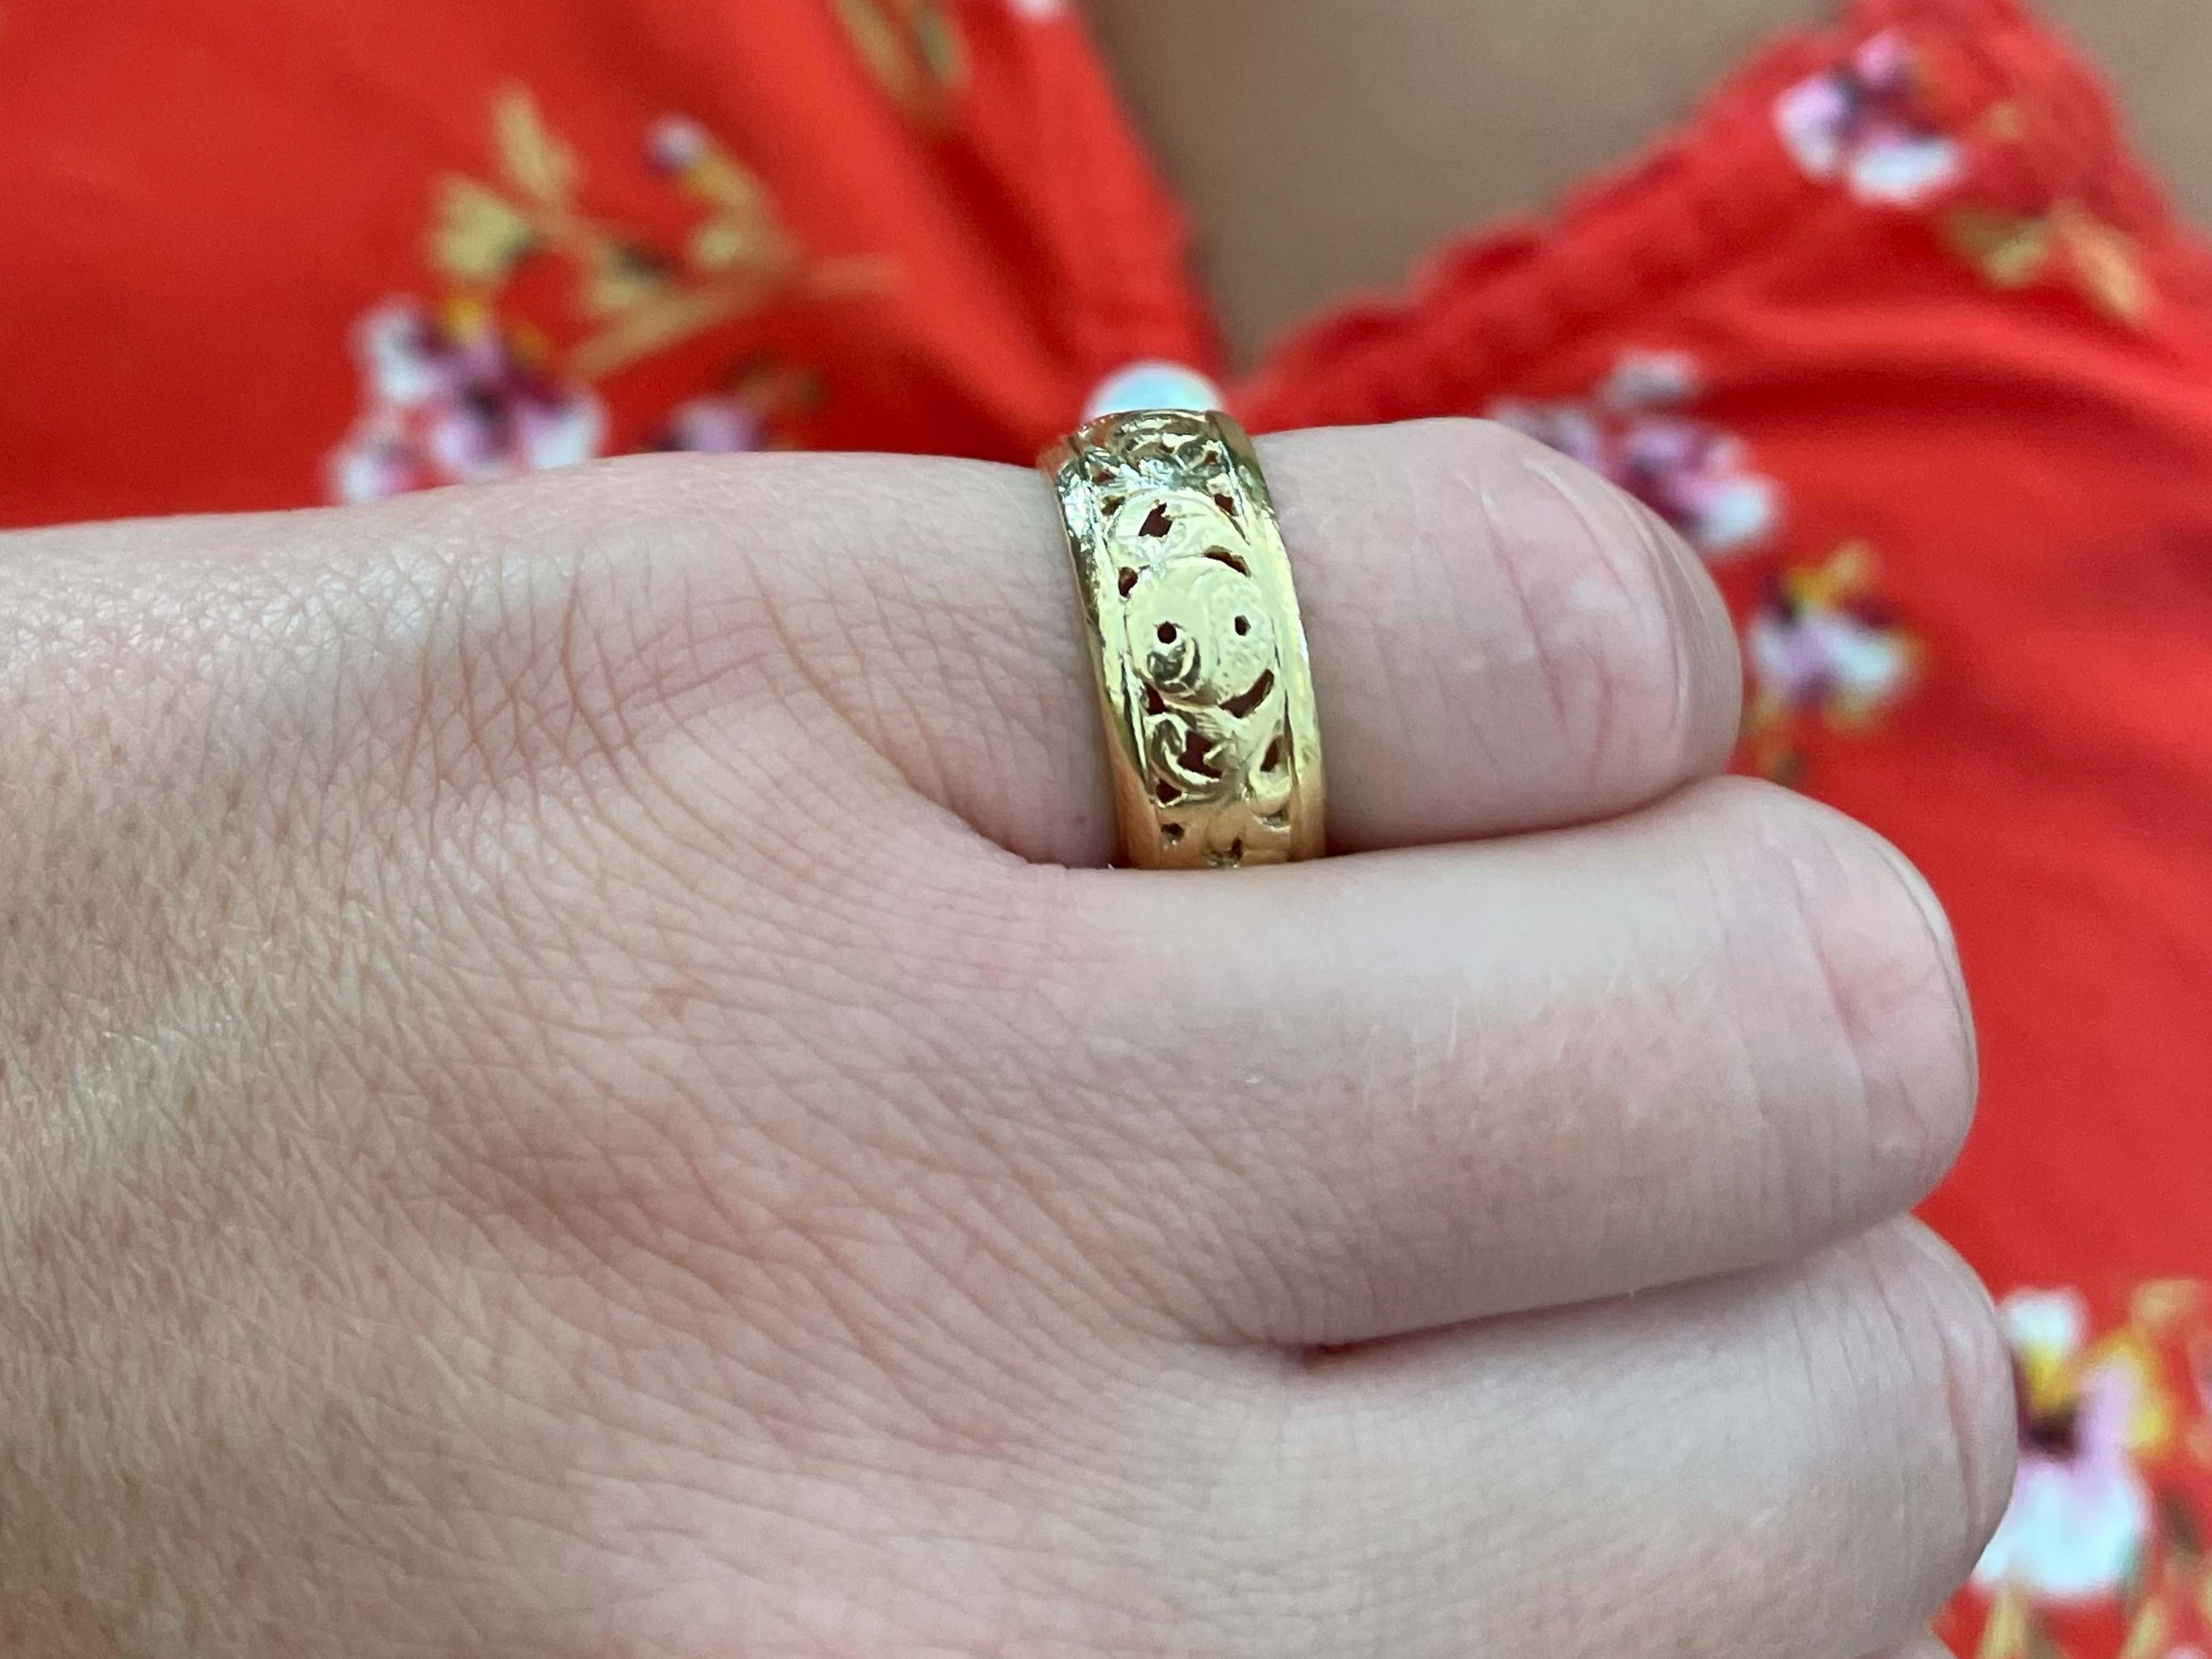 Ring Specifications:

Designer: Ming's

Metal: 14k Yellow Gold

Total Weight: 4.1 Grams

Ring Size: 5.25 (resizable)

Stamped: 